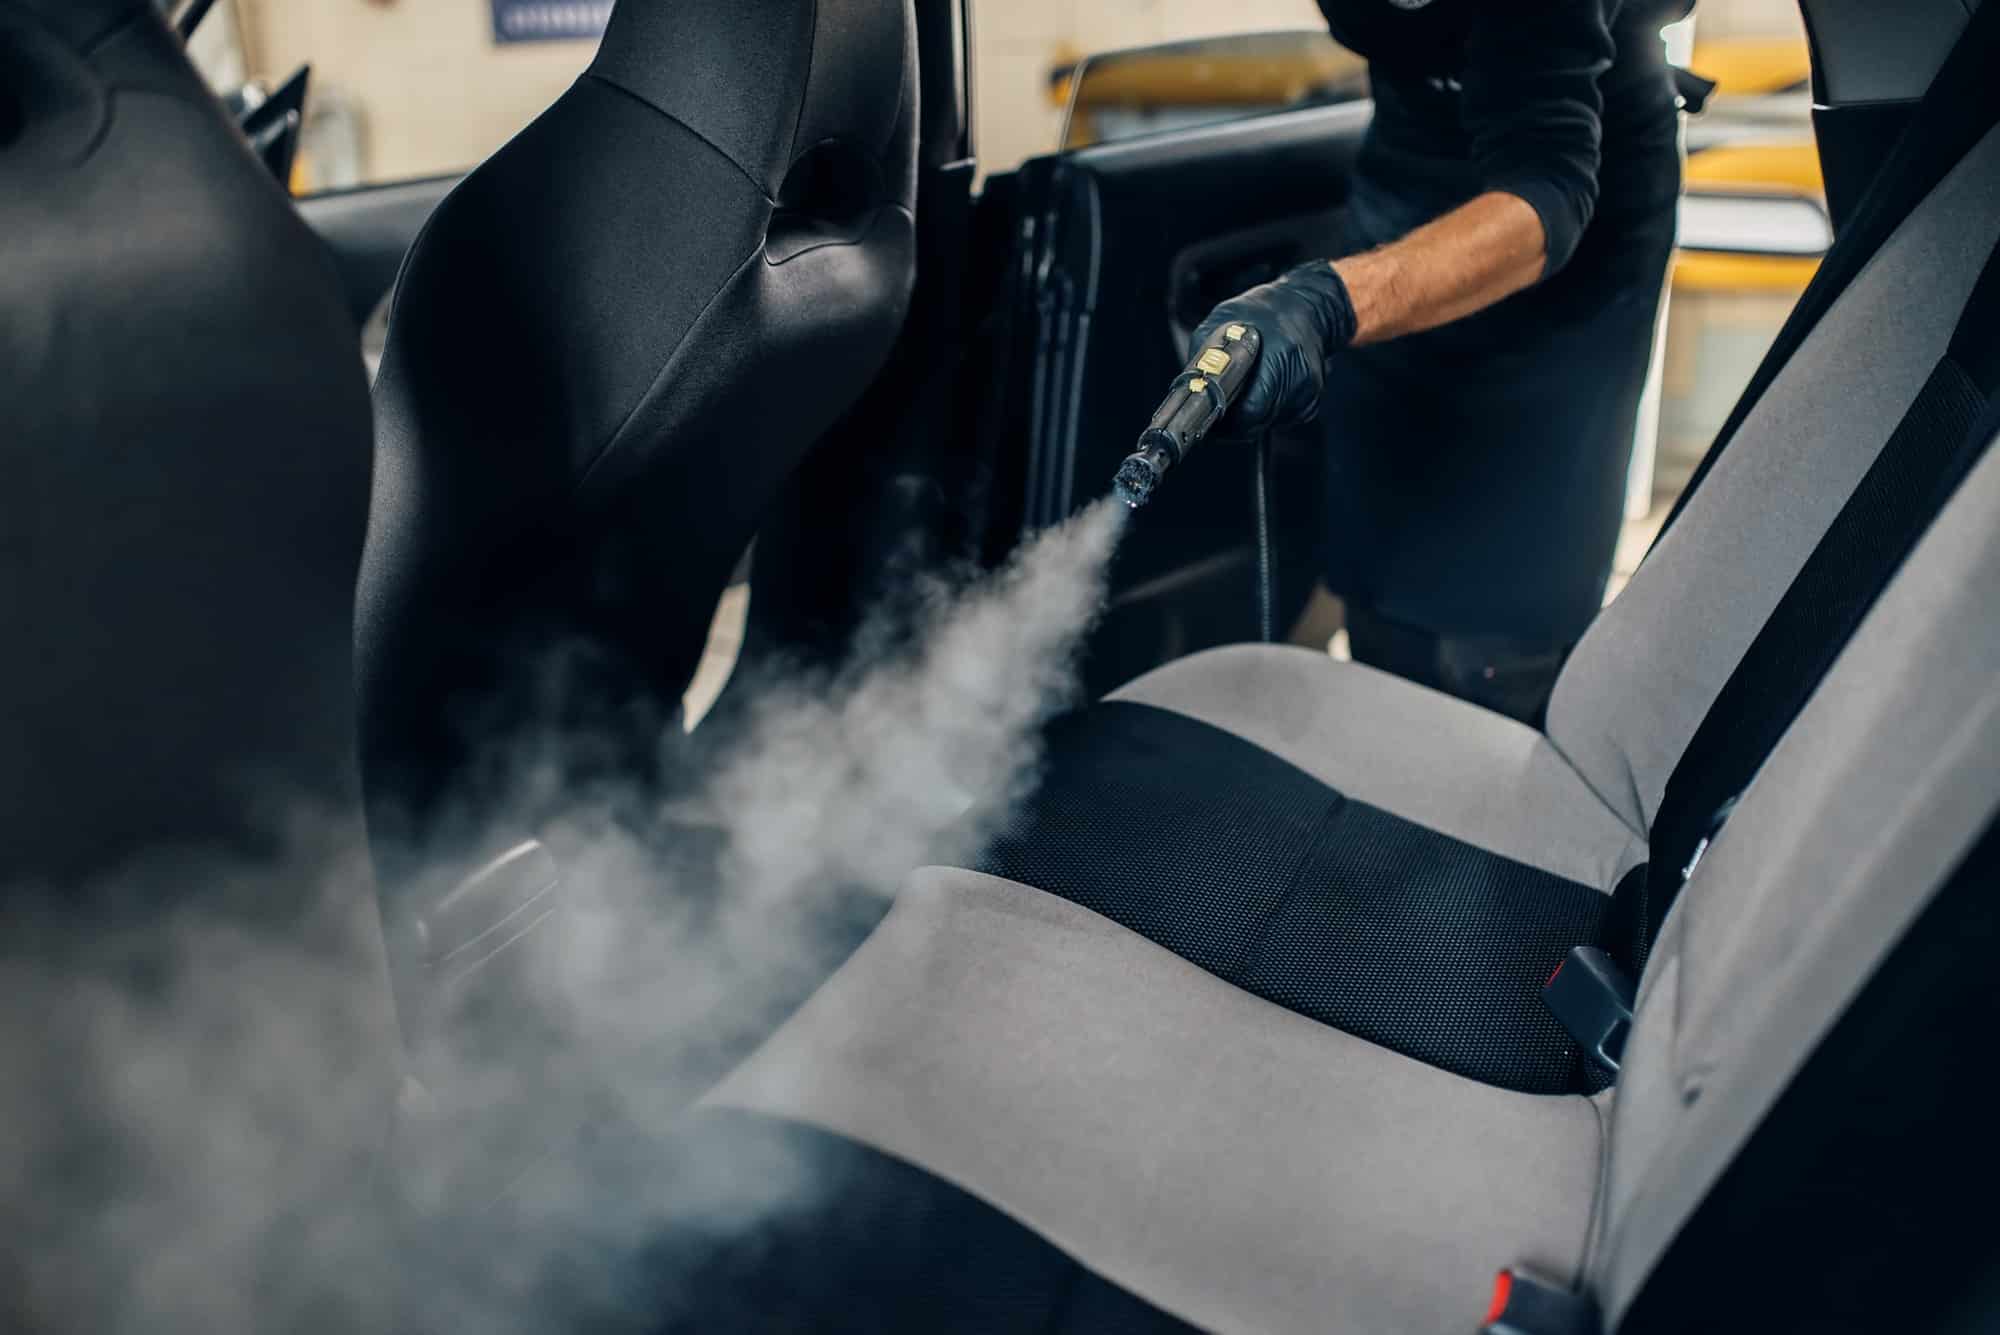 carwash worker cleans seats with steam cleaner